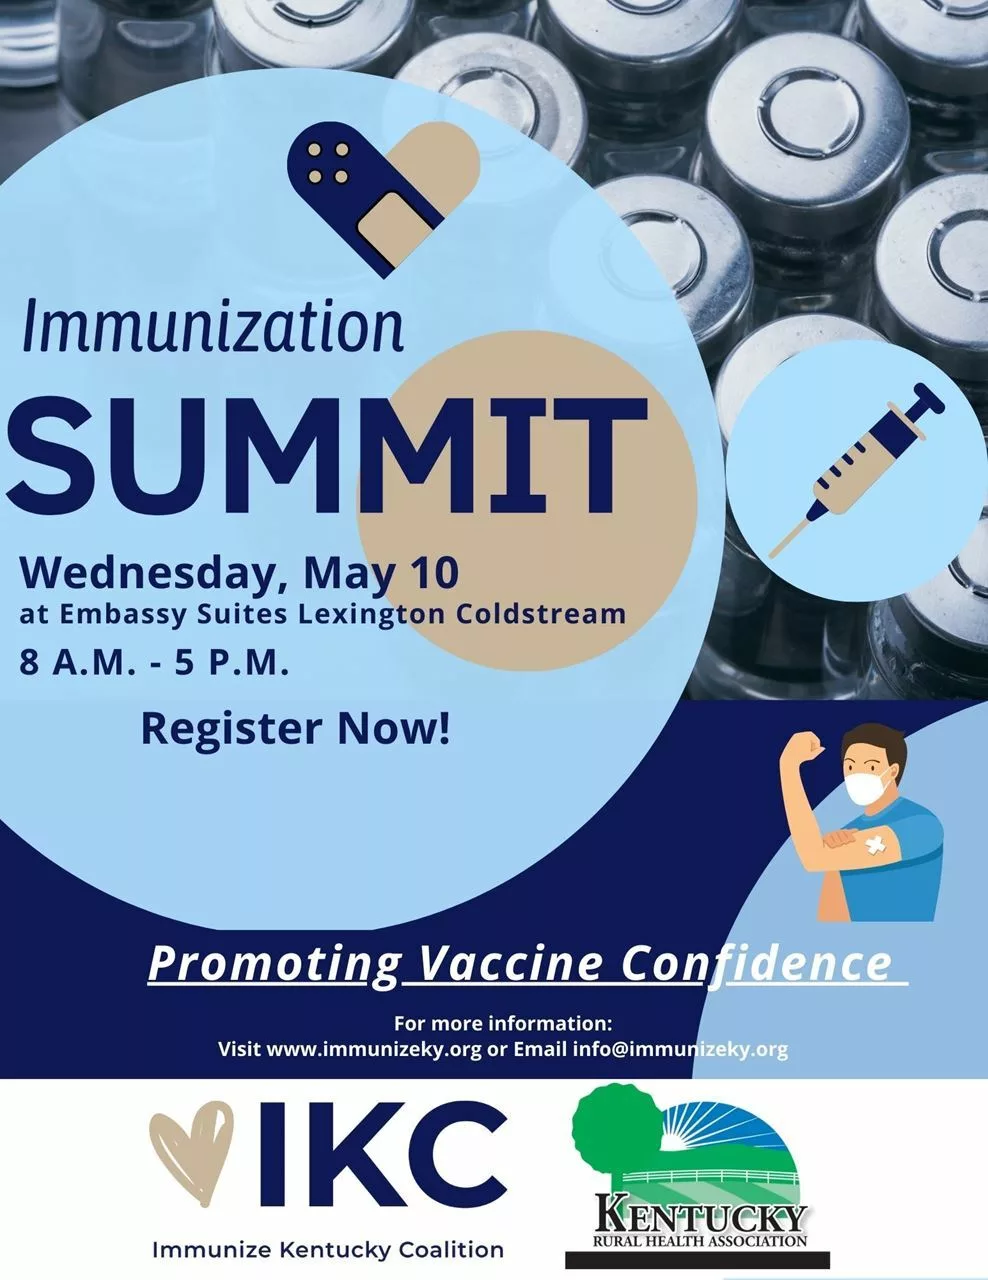 All-day Immunization Summit to be held in Lexington May 10